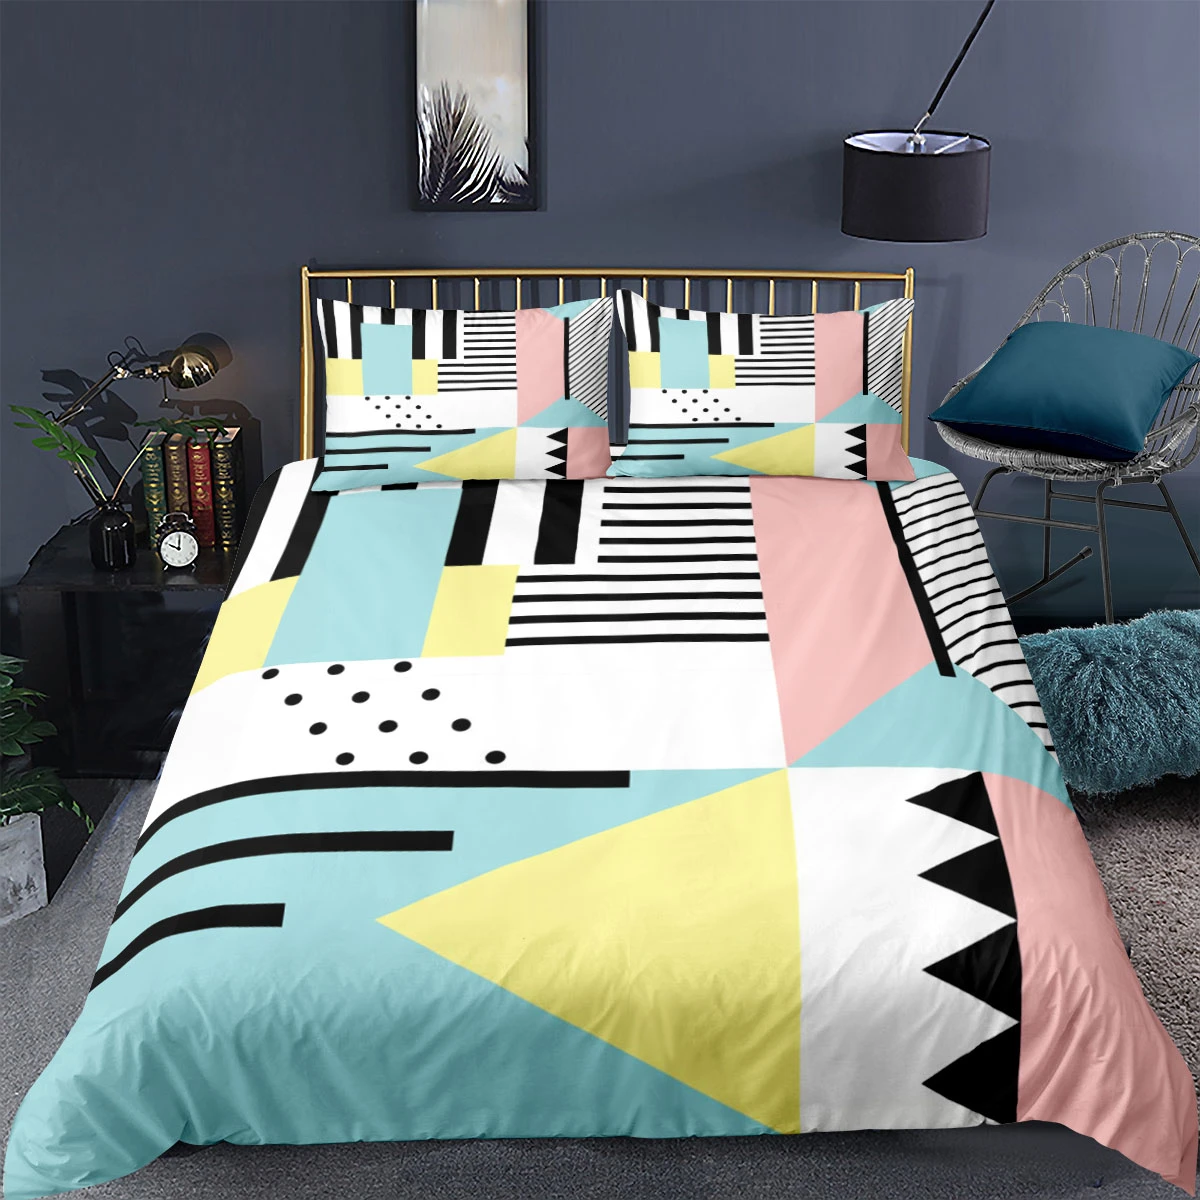 Geometric Splicing Marble Bedding Set Colorful Duvet Cover Abstract Pattern Printed Comforter Bed Set King Size For Girl/Adult